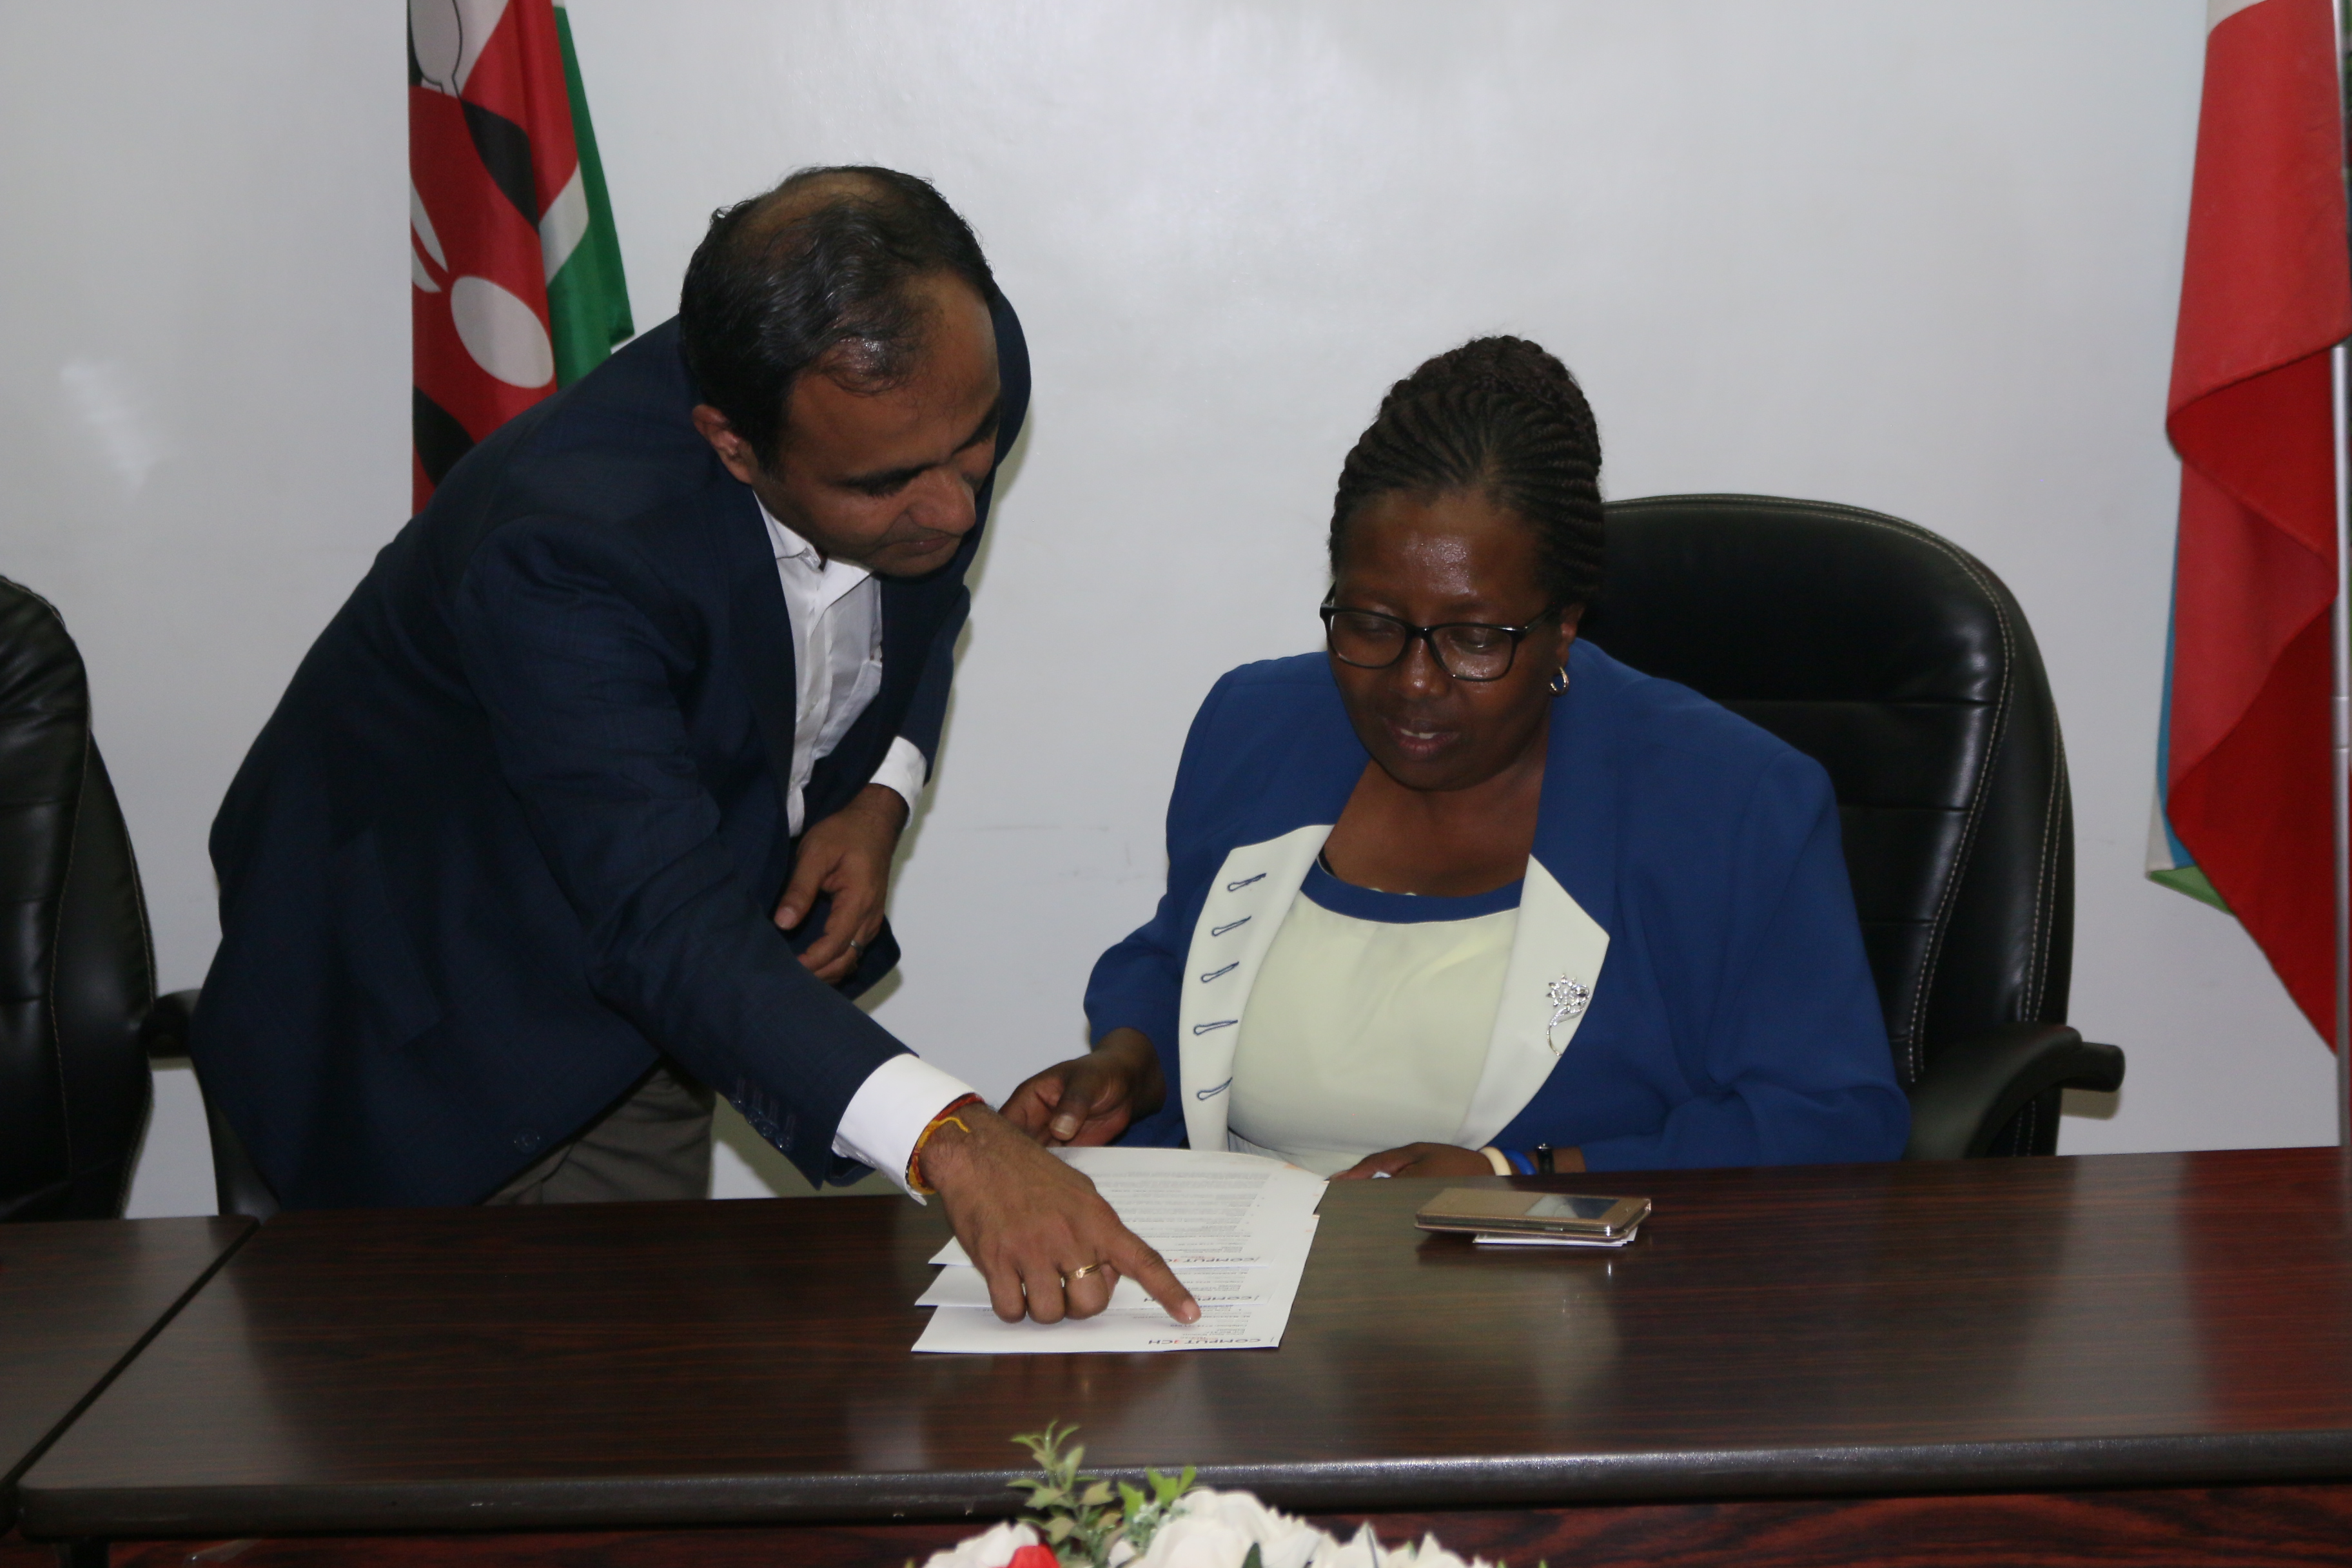 Vice Chancellor Prof. Victoria Ngumi confers with Computech's Santhosh Kumar at the meeting